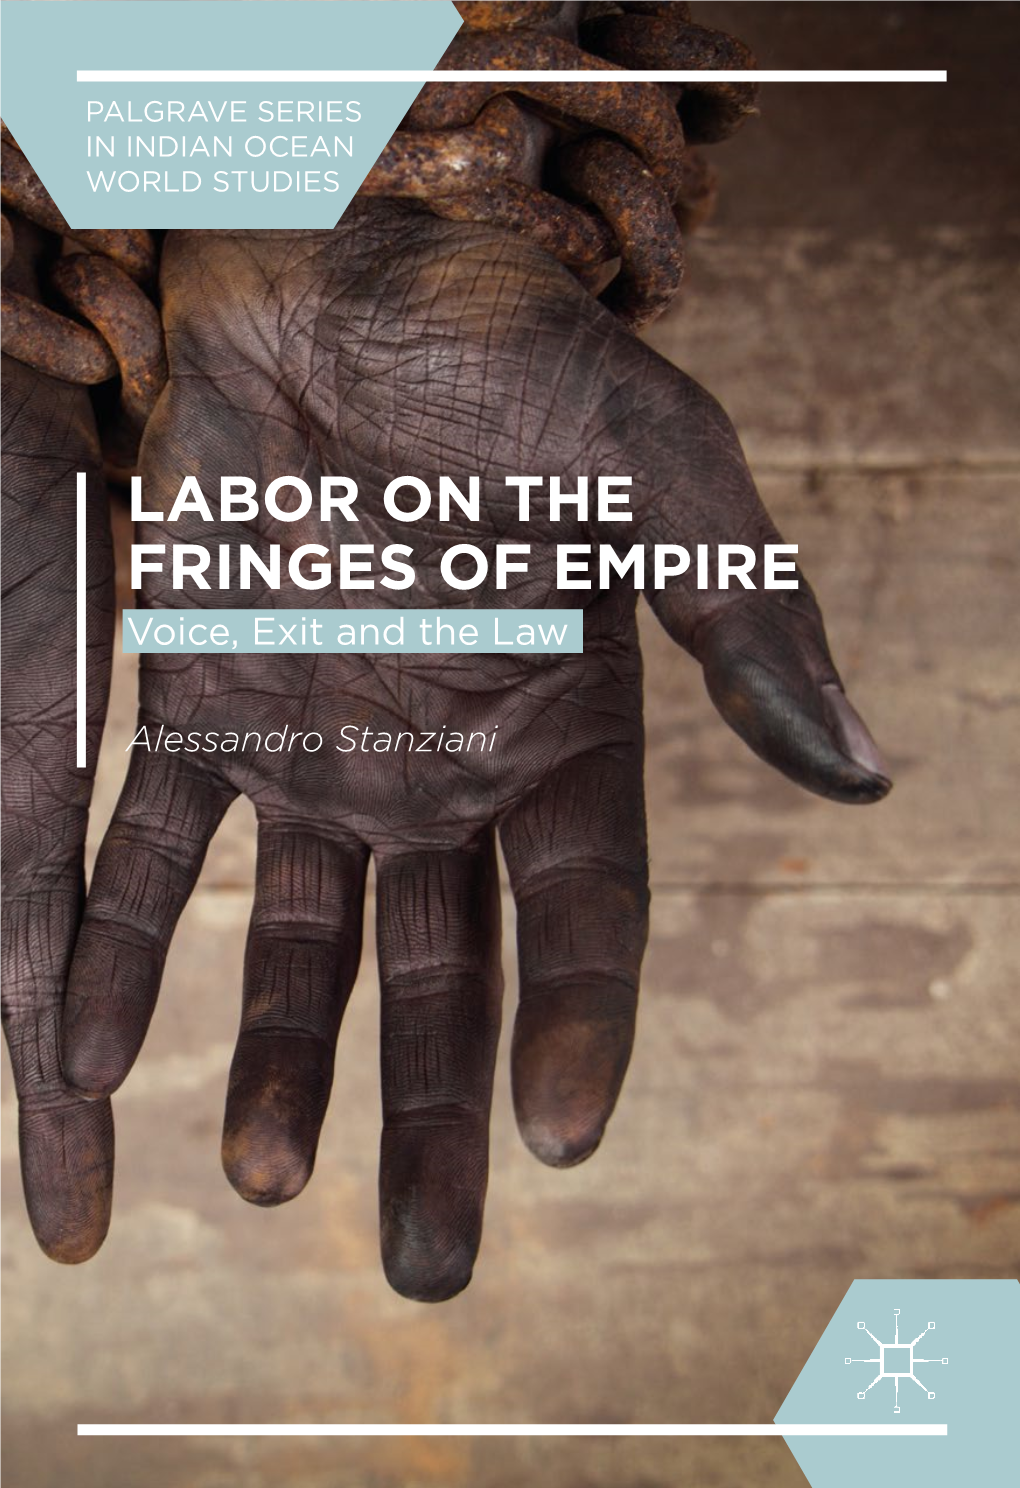 LABOR on the FRINGES of EMPIRE Voice, Exit and the Law